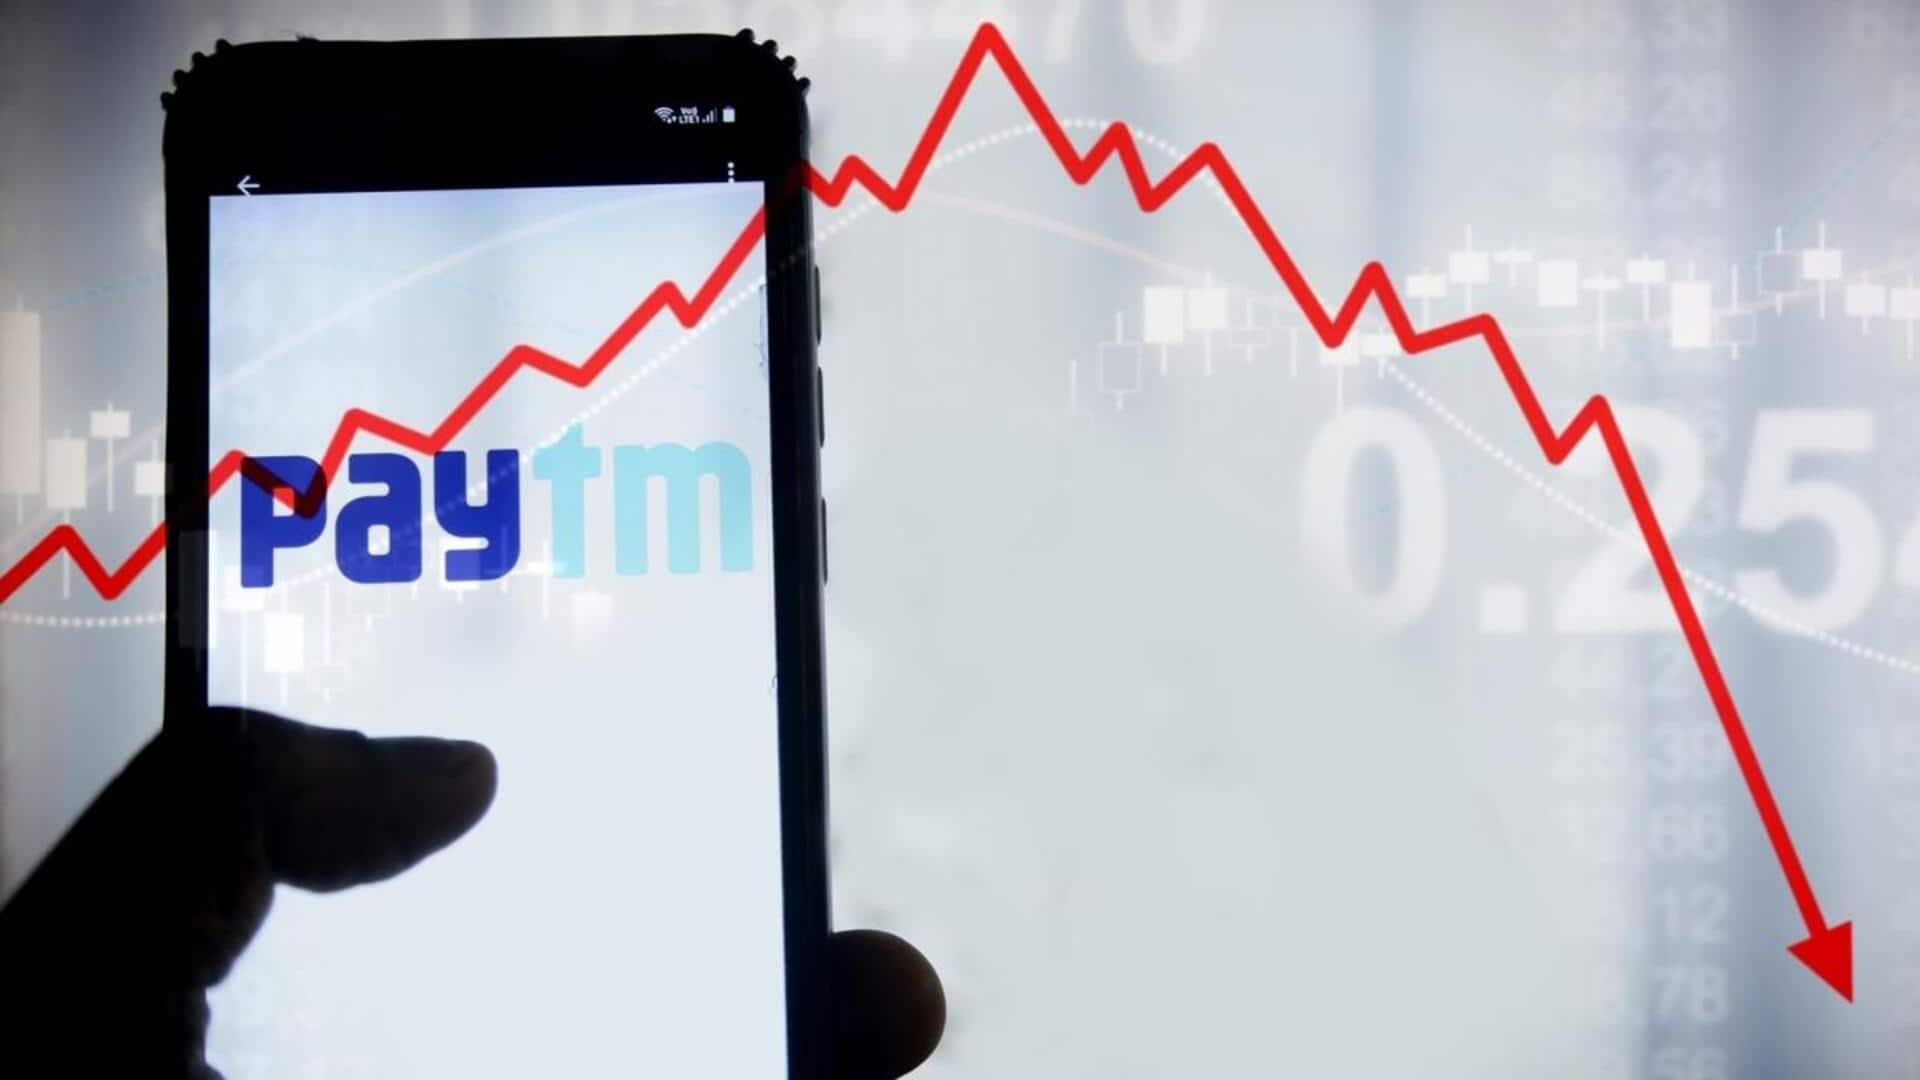 Paytm shares tumble to 52-week low, down 65% from highs